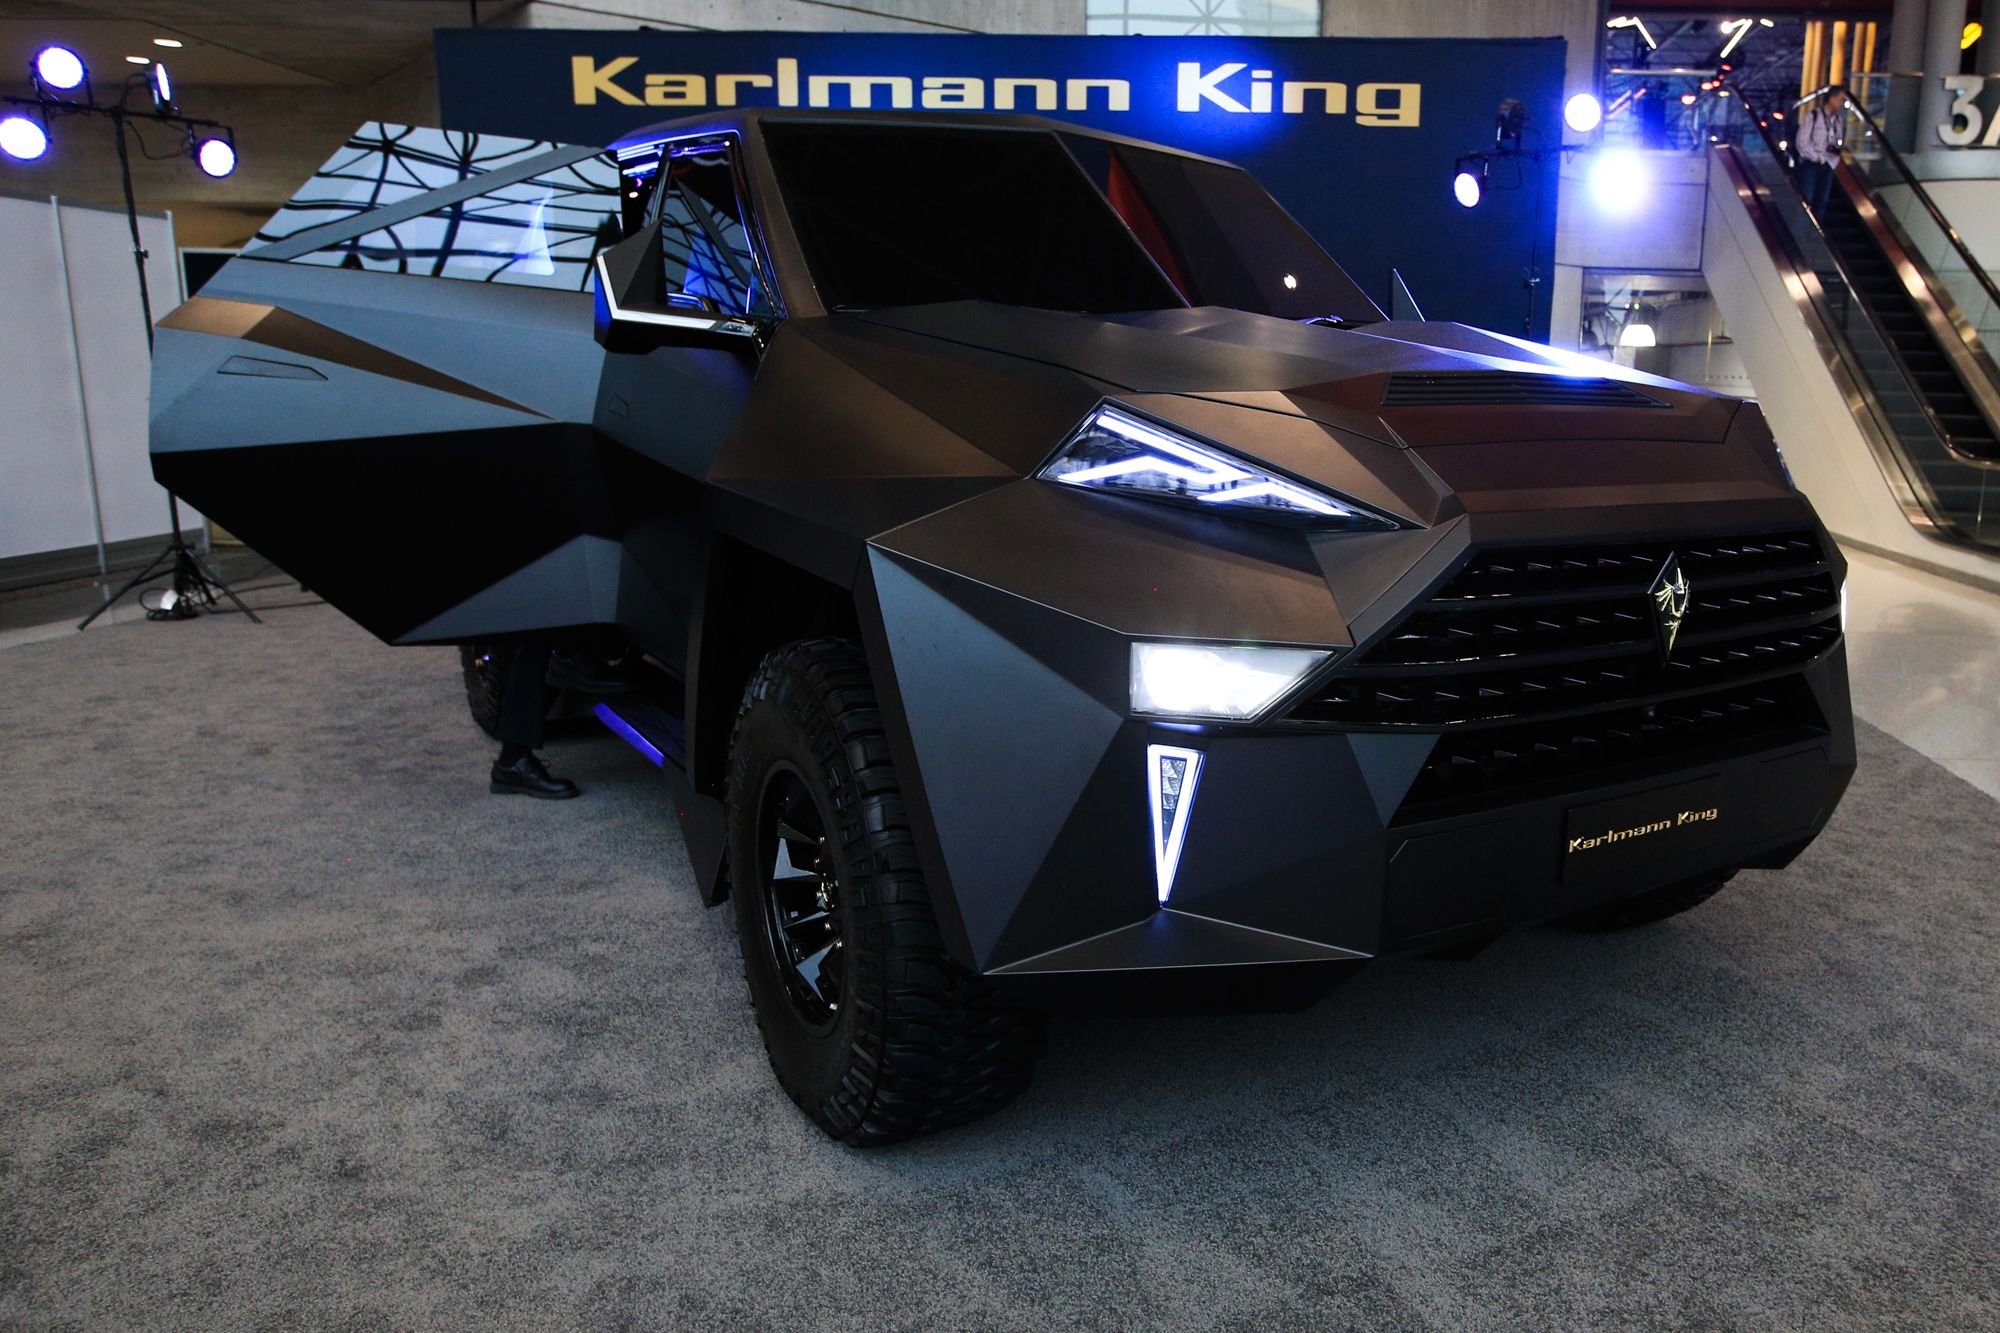 Take a look at the most expensive SUV in the world: the Karlmann King